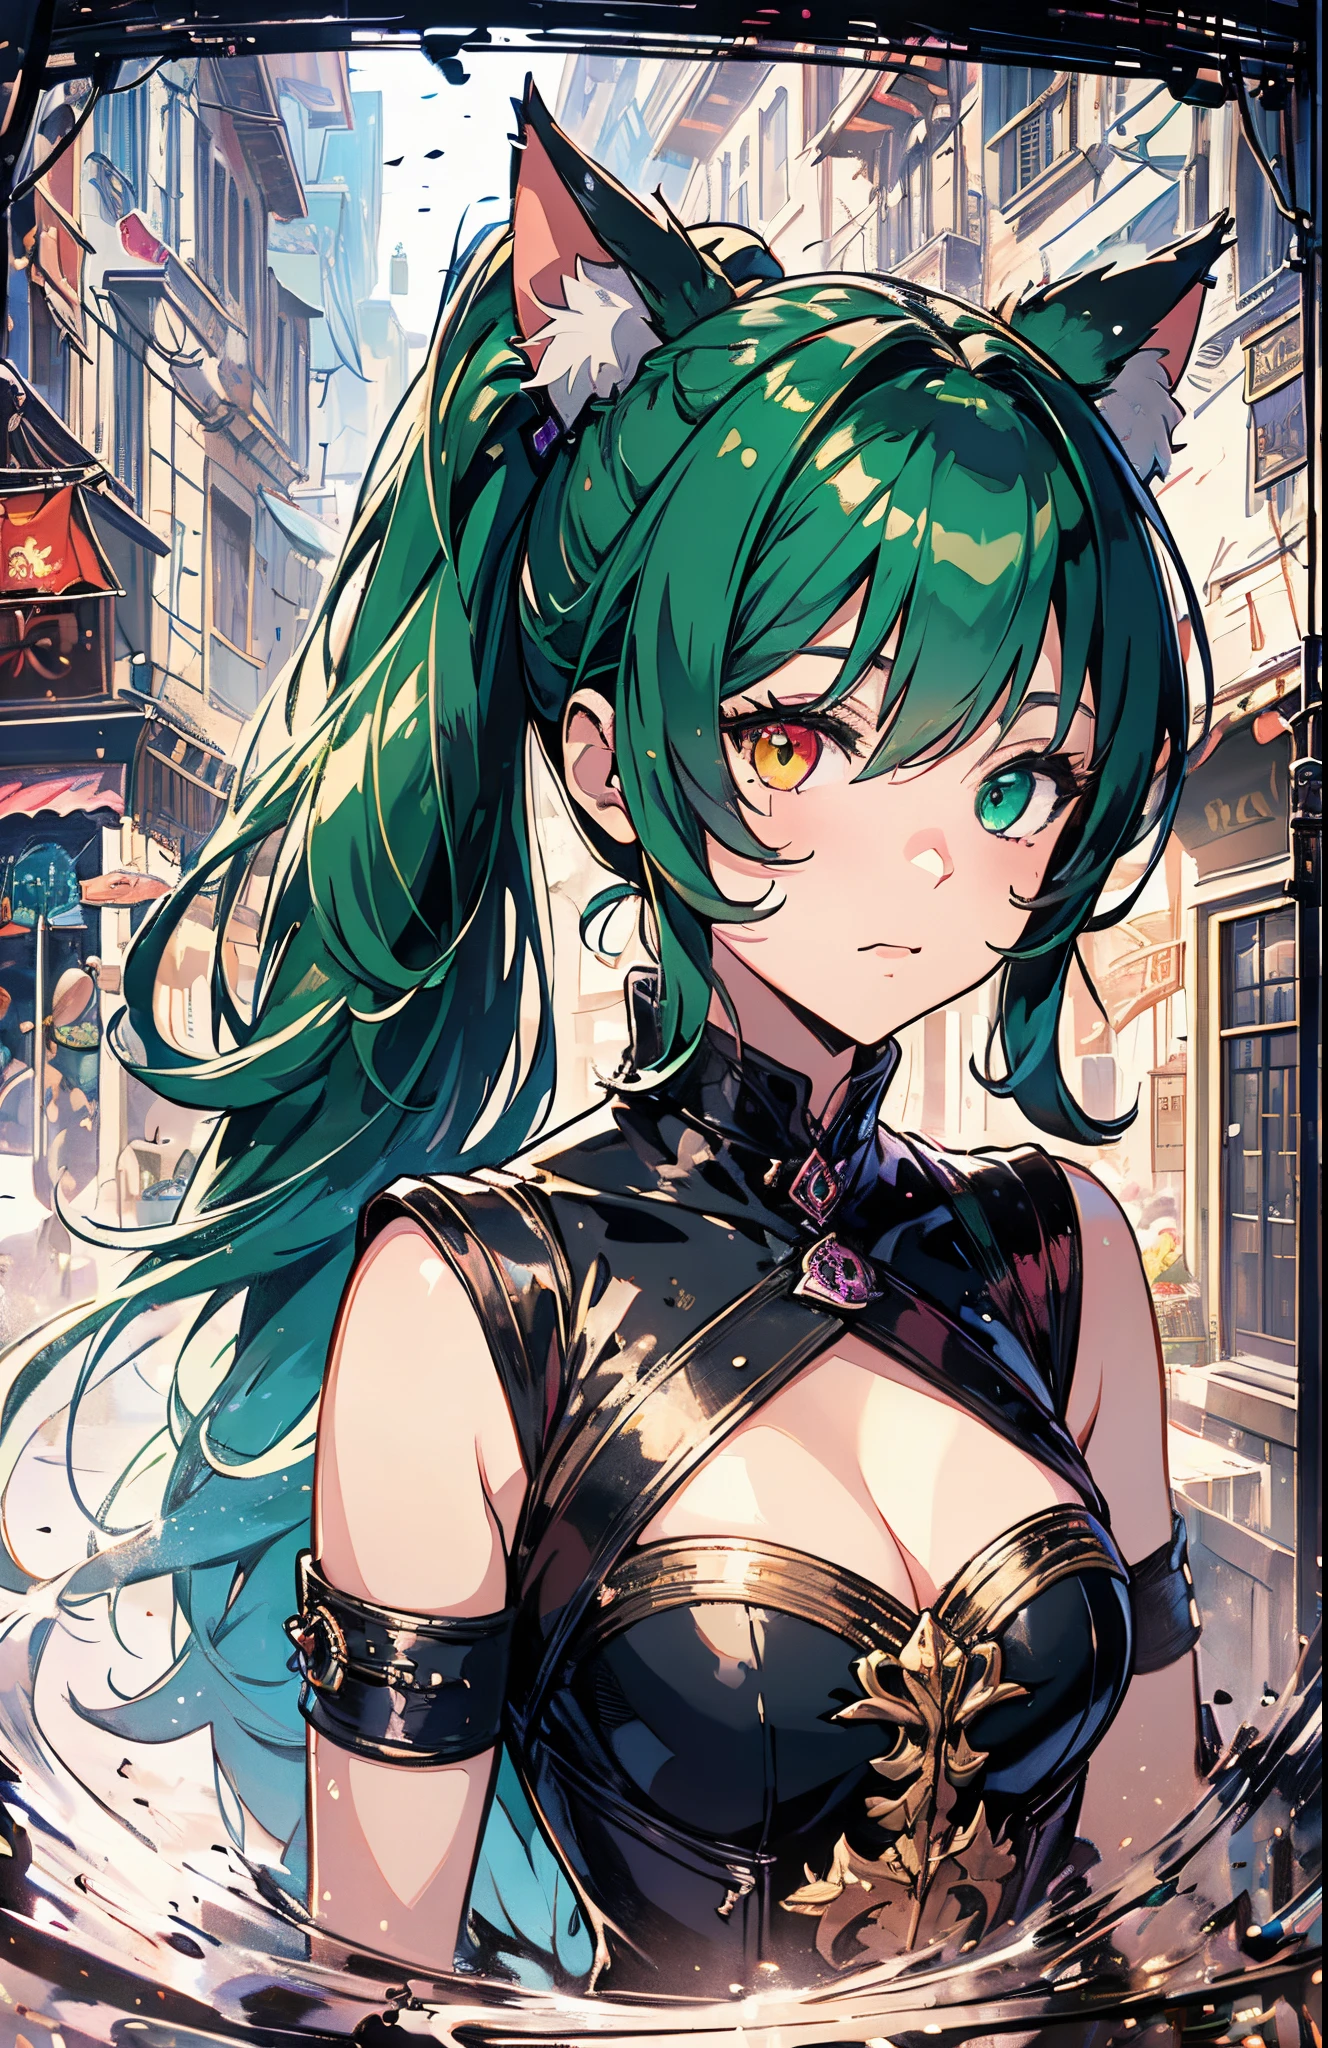 masterpiece, highly detailed, concept art, medium shot, anime style, (catgirl:1.4), cat ears, (heterochromia eyes:1.2), (violet and green multi-colored ponytail hair), cute, Leather outfit, fantasy theme, bustling medieval market background, epic composition, epic proportion, Contrast, HD